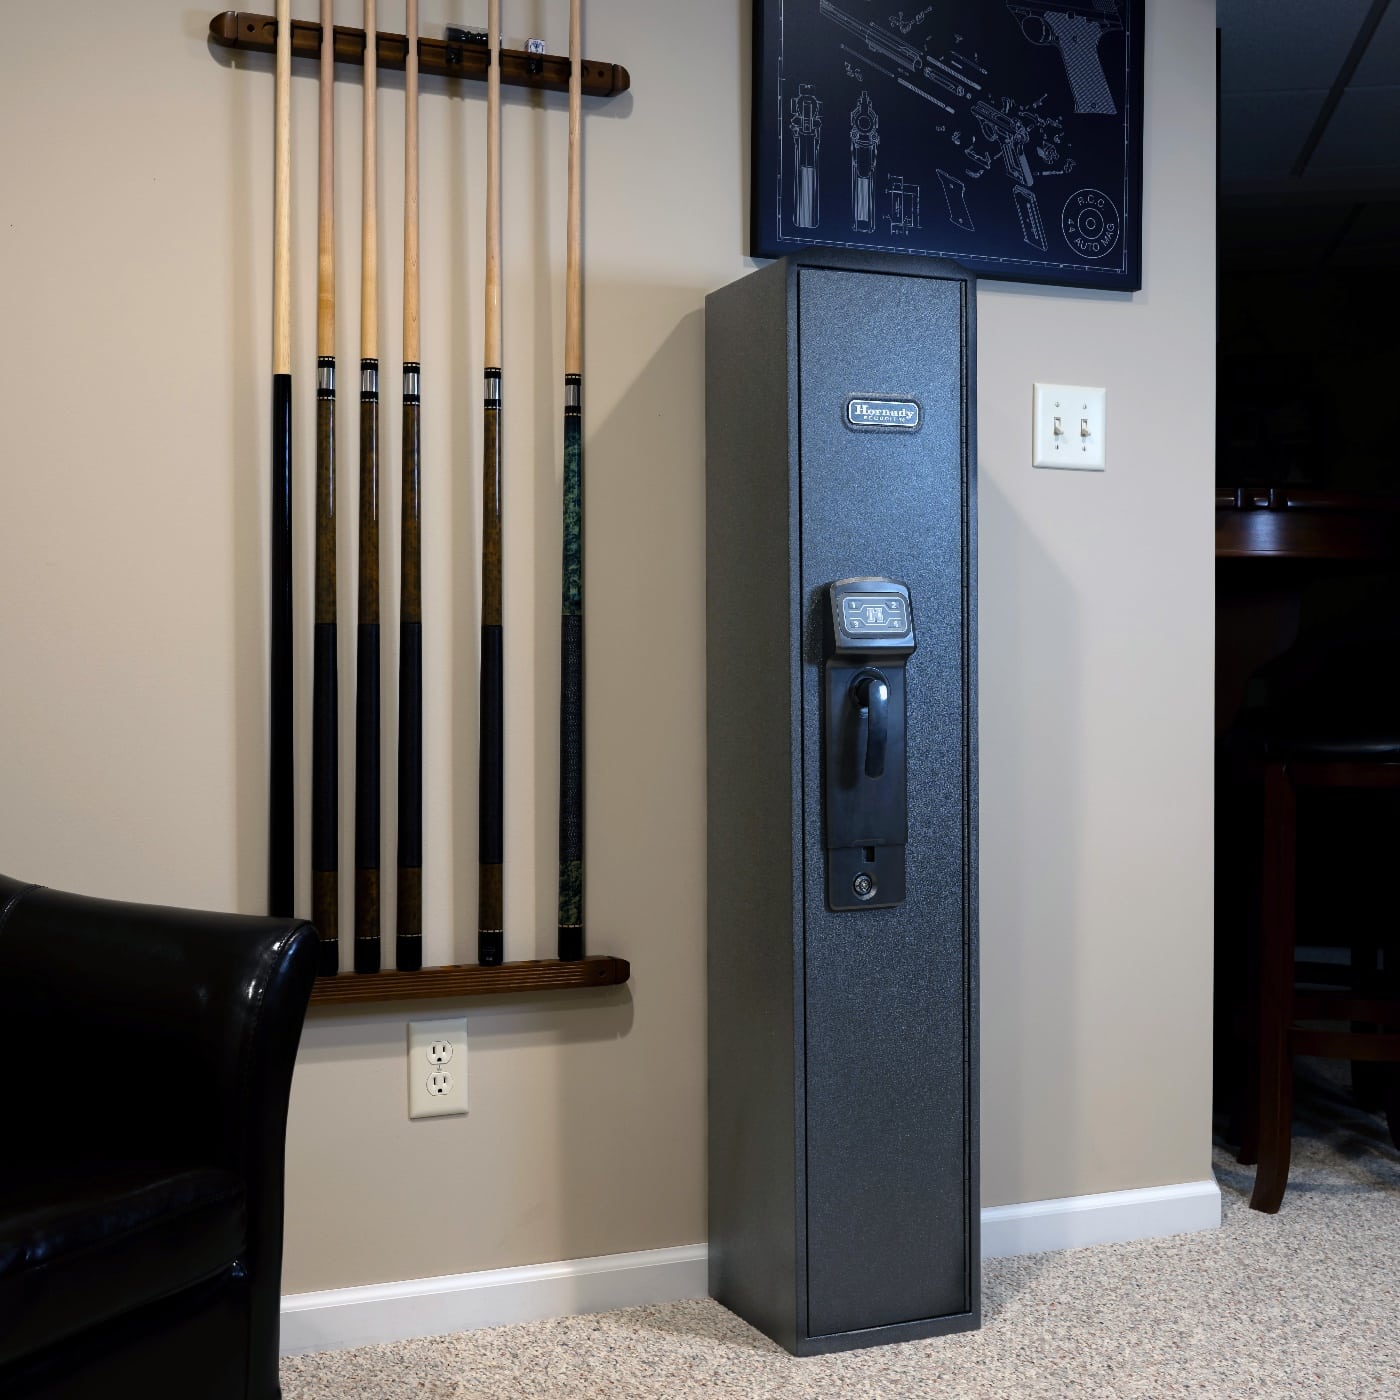 In this photo, we see the Hornady RAPiD Safe Ready Vault in his living room. A gun safe is a safe designed for storing one or more firearms and/or ammunitions. 